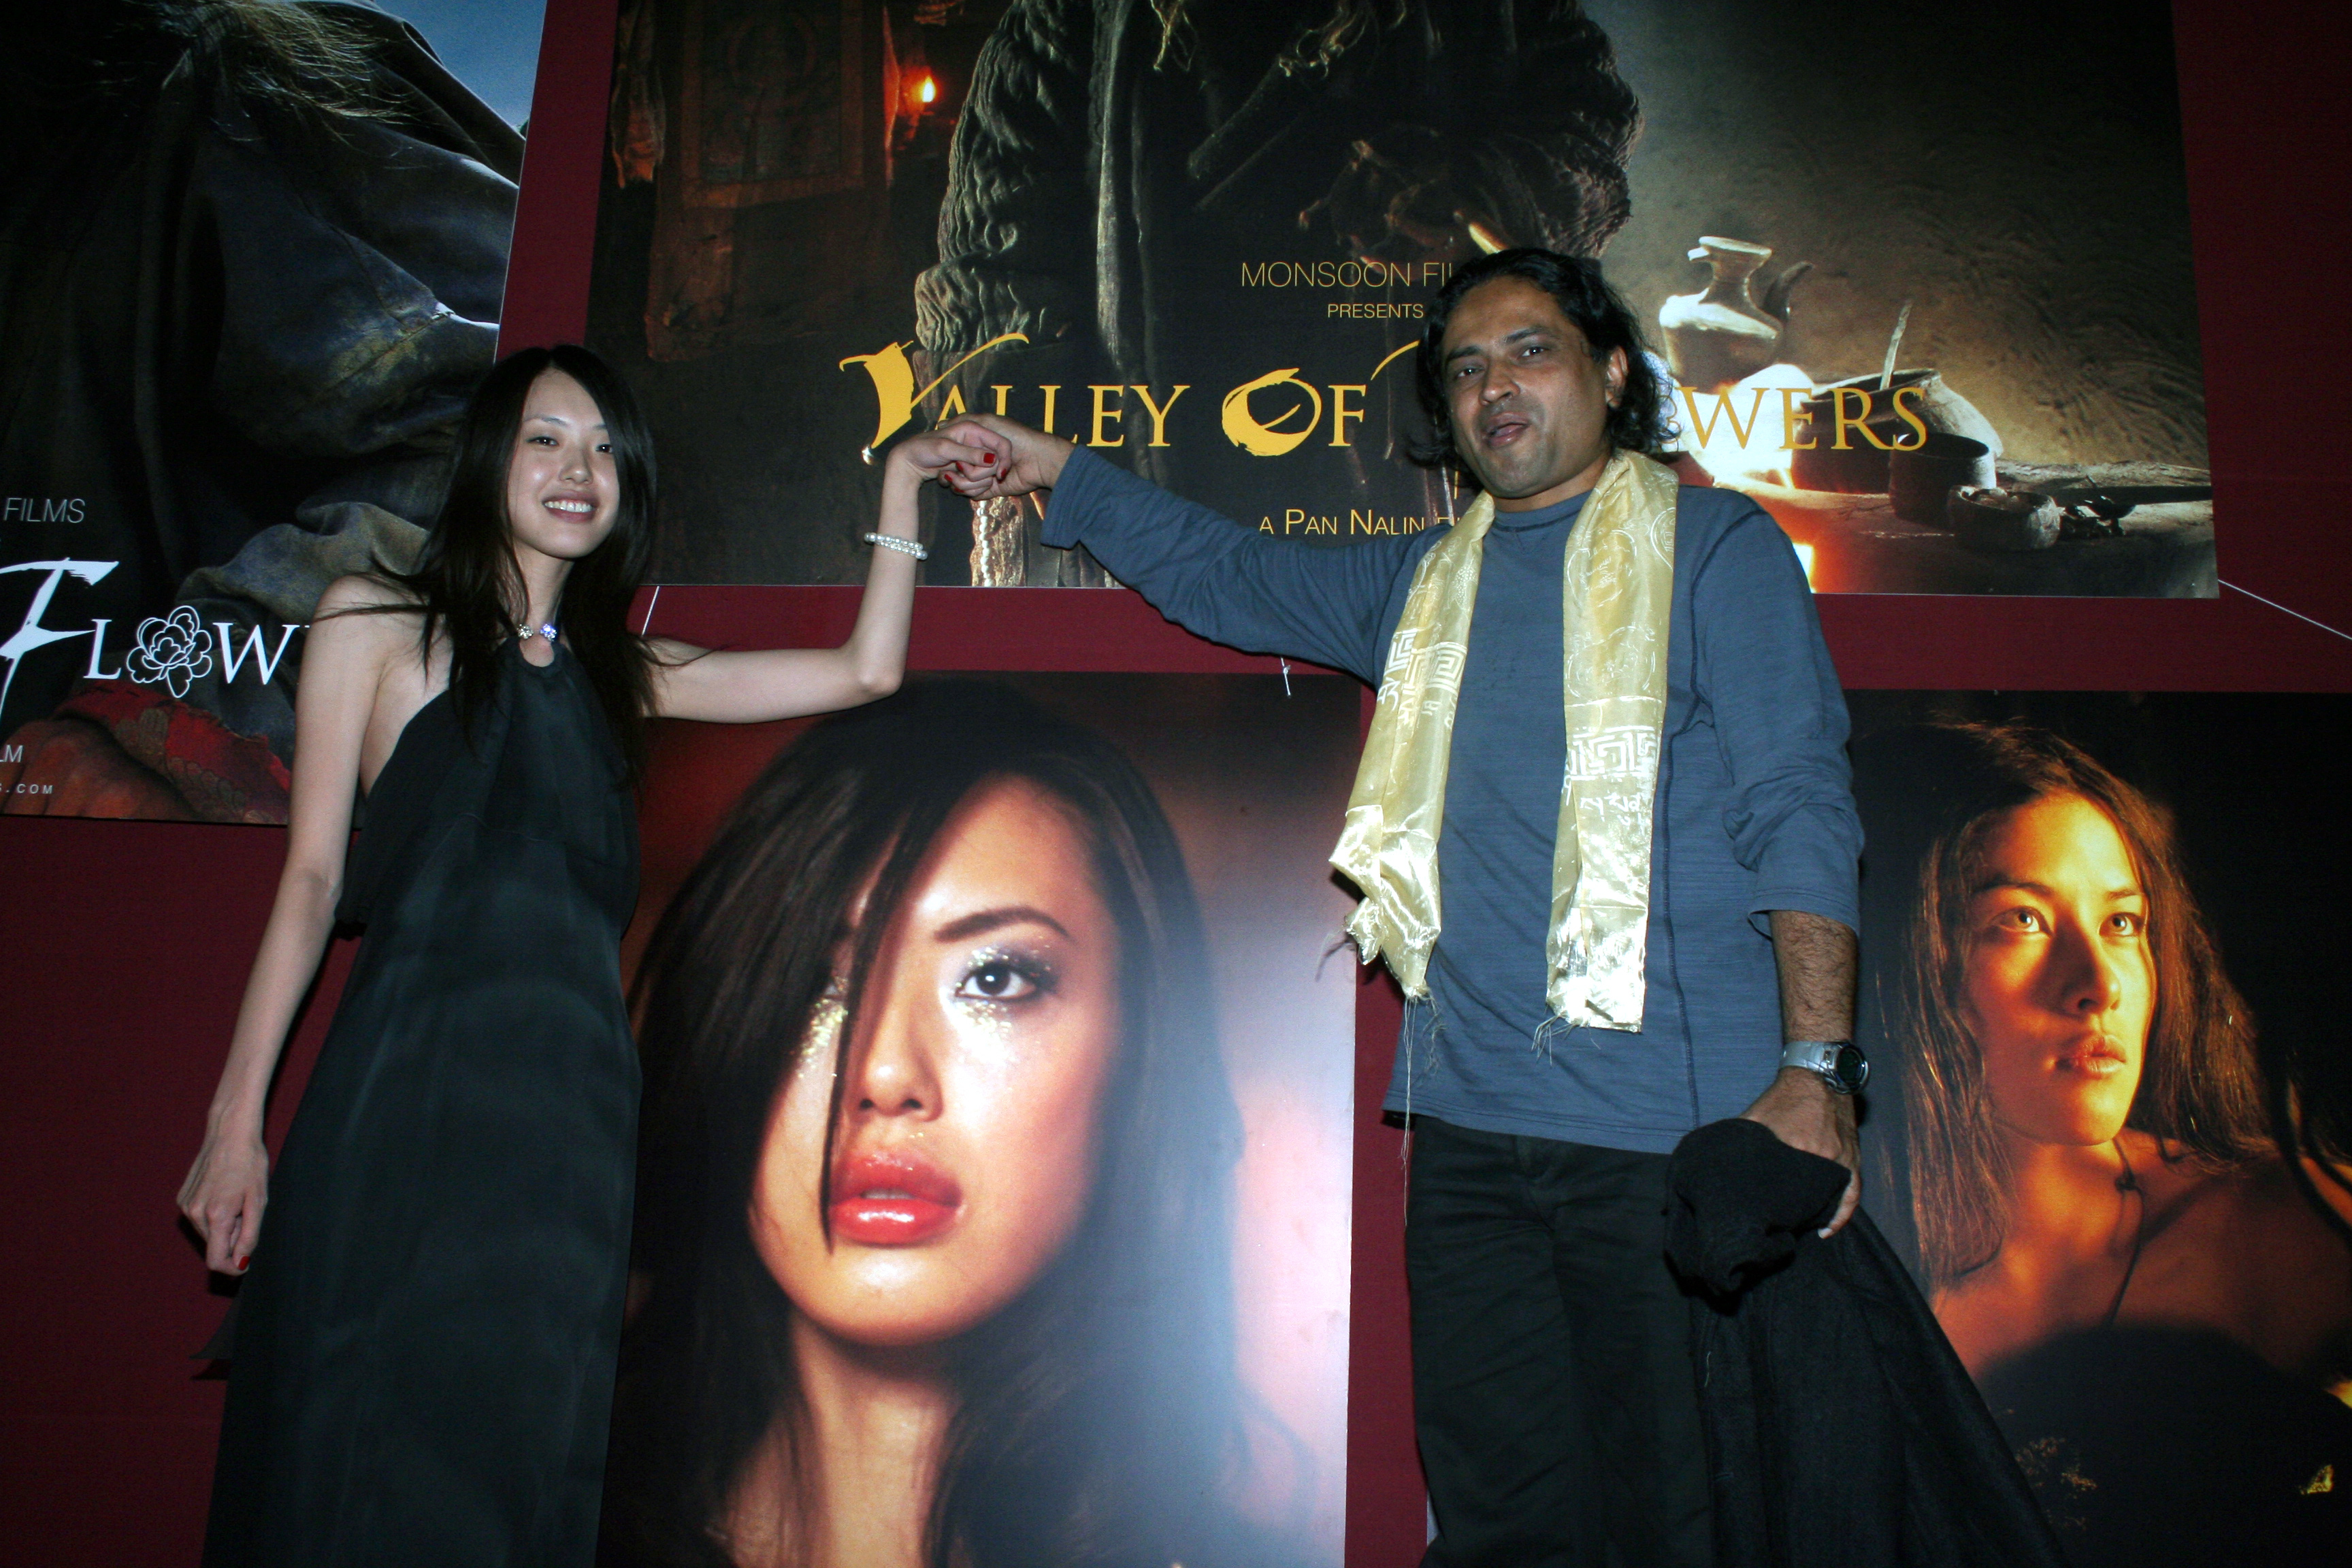 Japanese top model Eri & Pan Nalin at the World Premiere of VALLEY OF FLOWERS